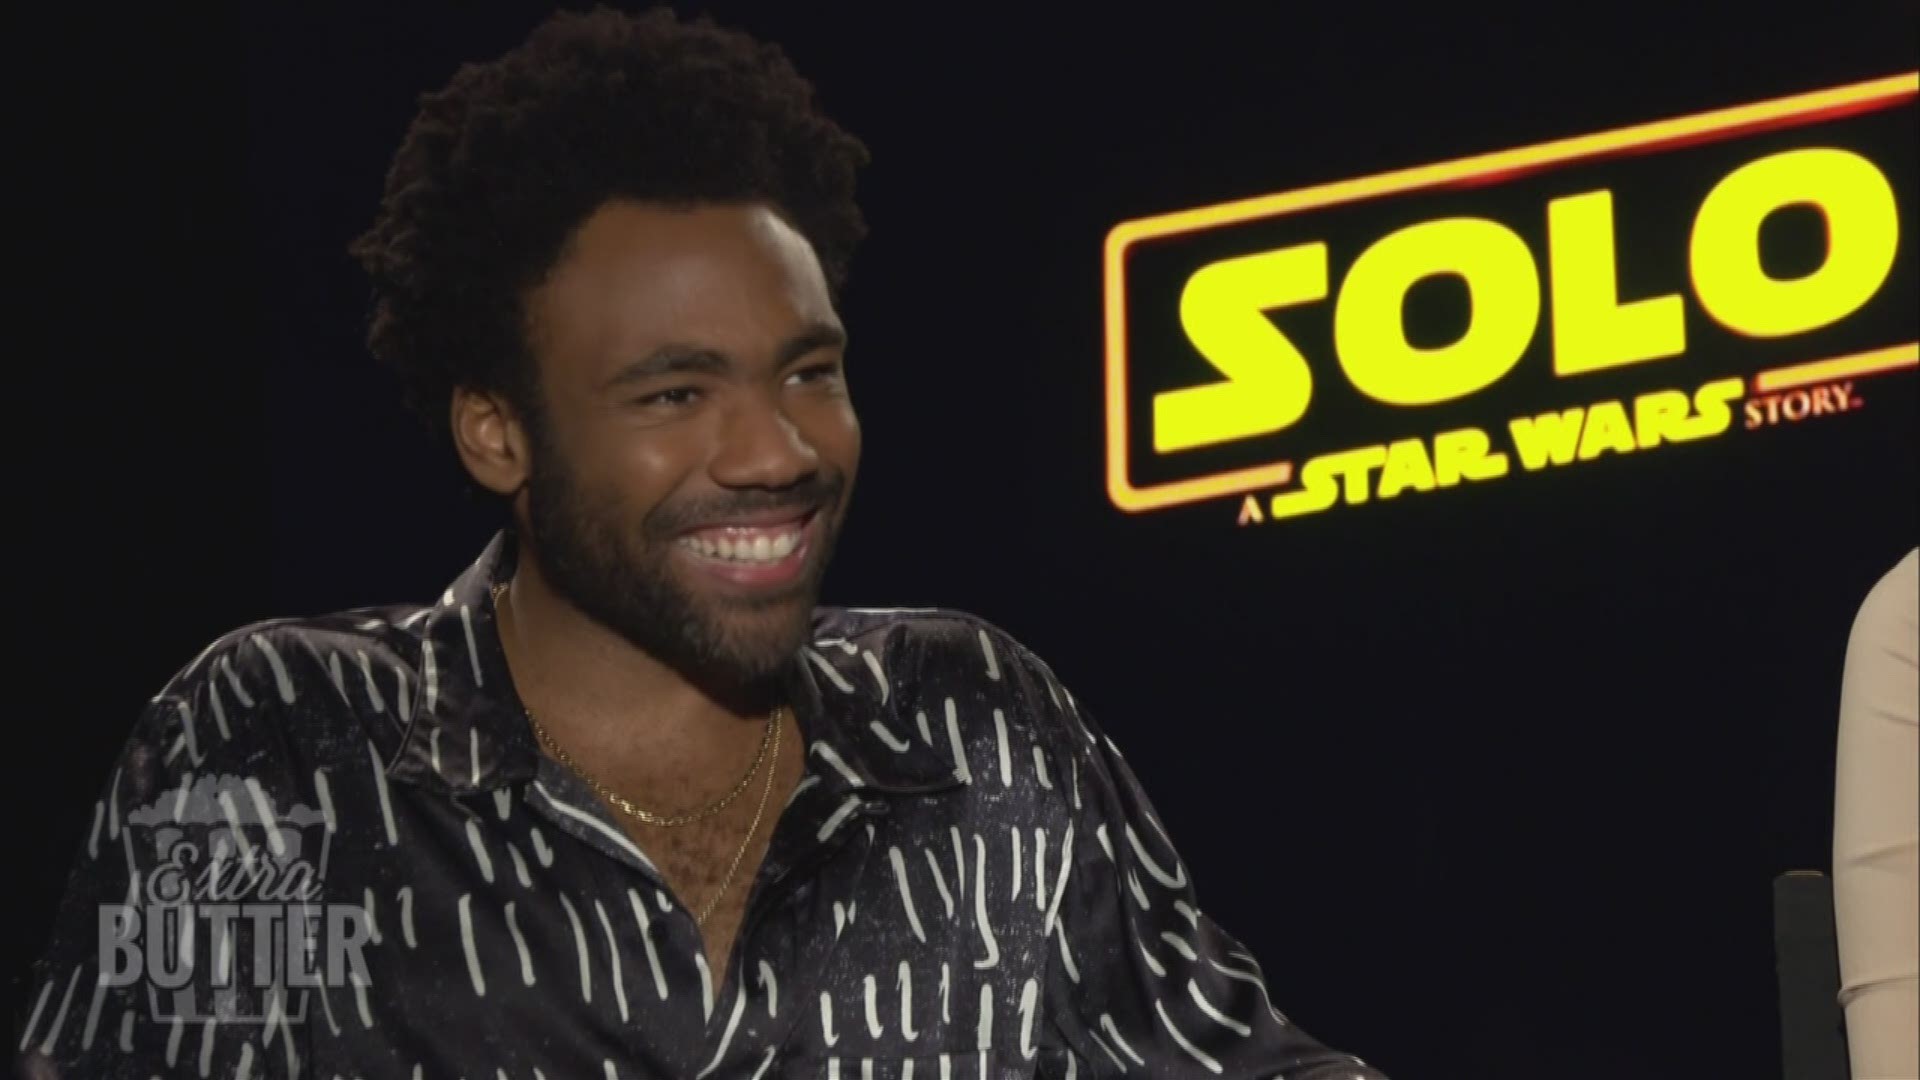 Mark S. Allen talks with the stars of 'Solo' including Donald Glover, Alden Ehrenreich and Ron Howard.